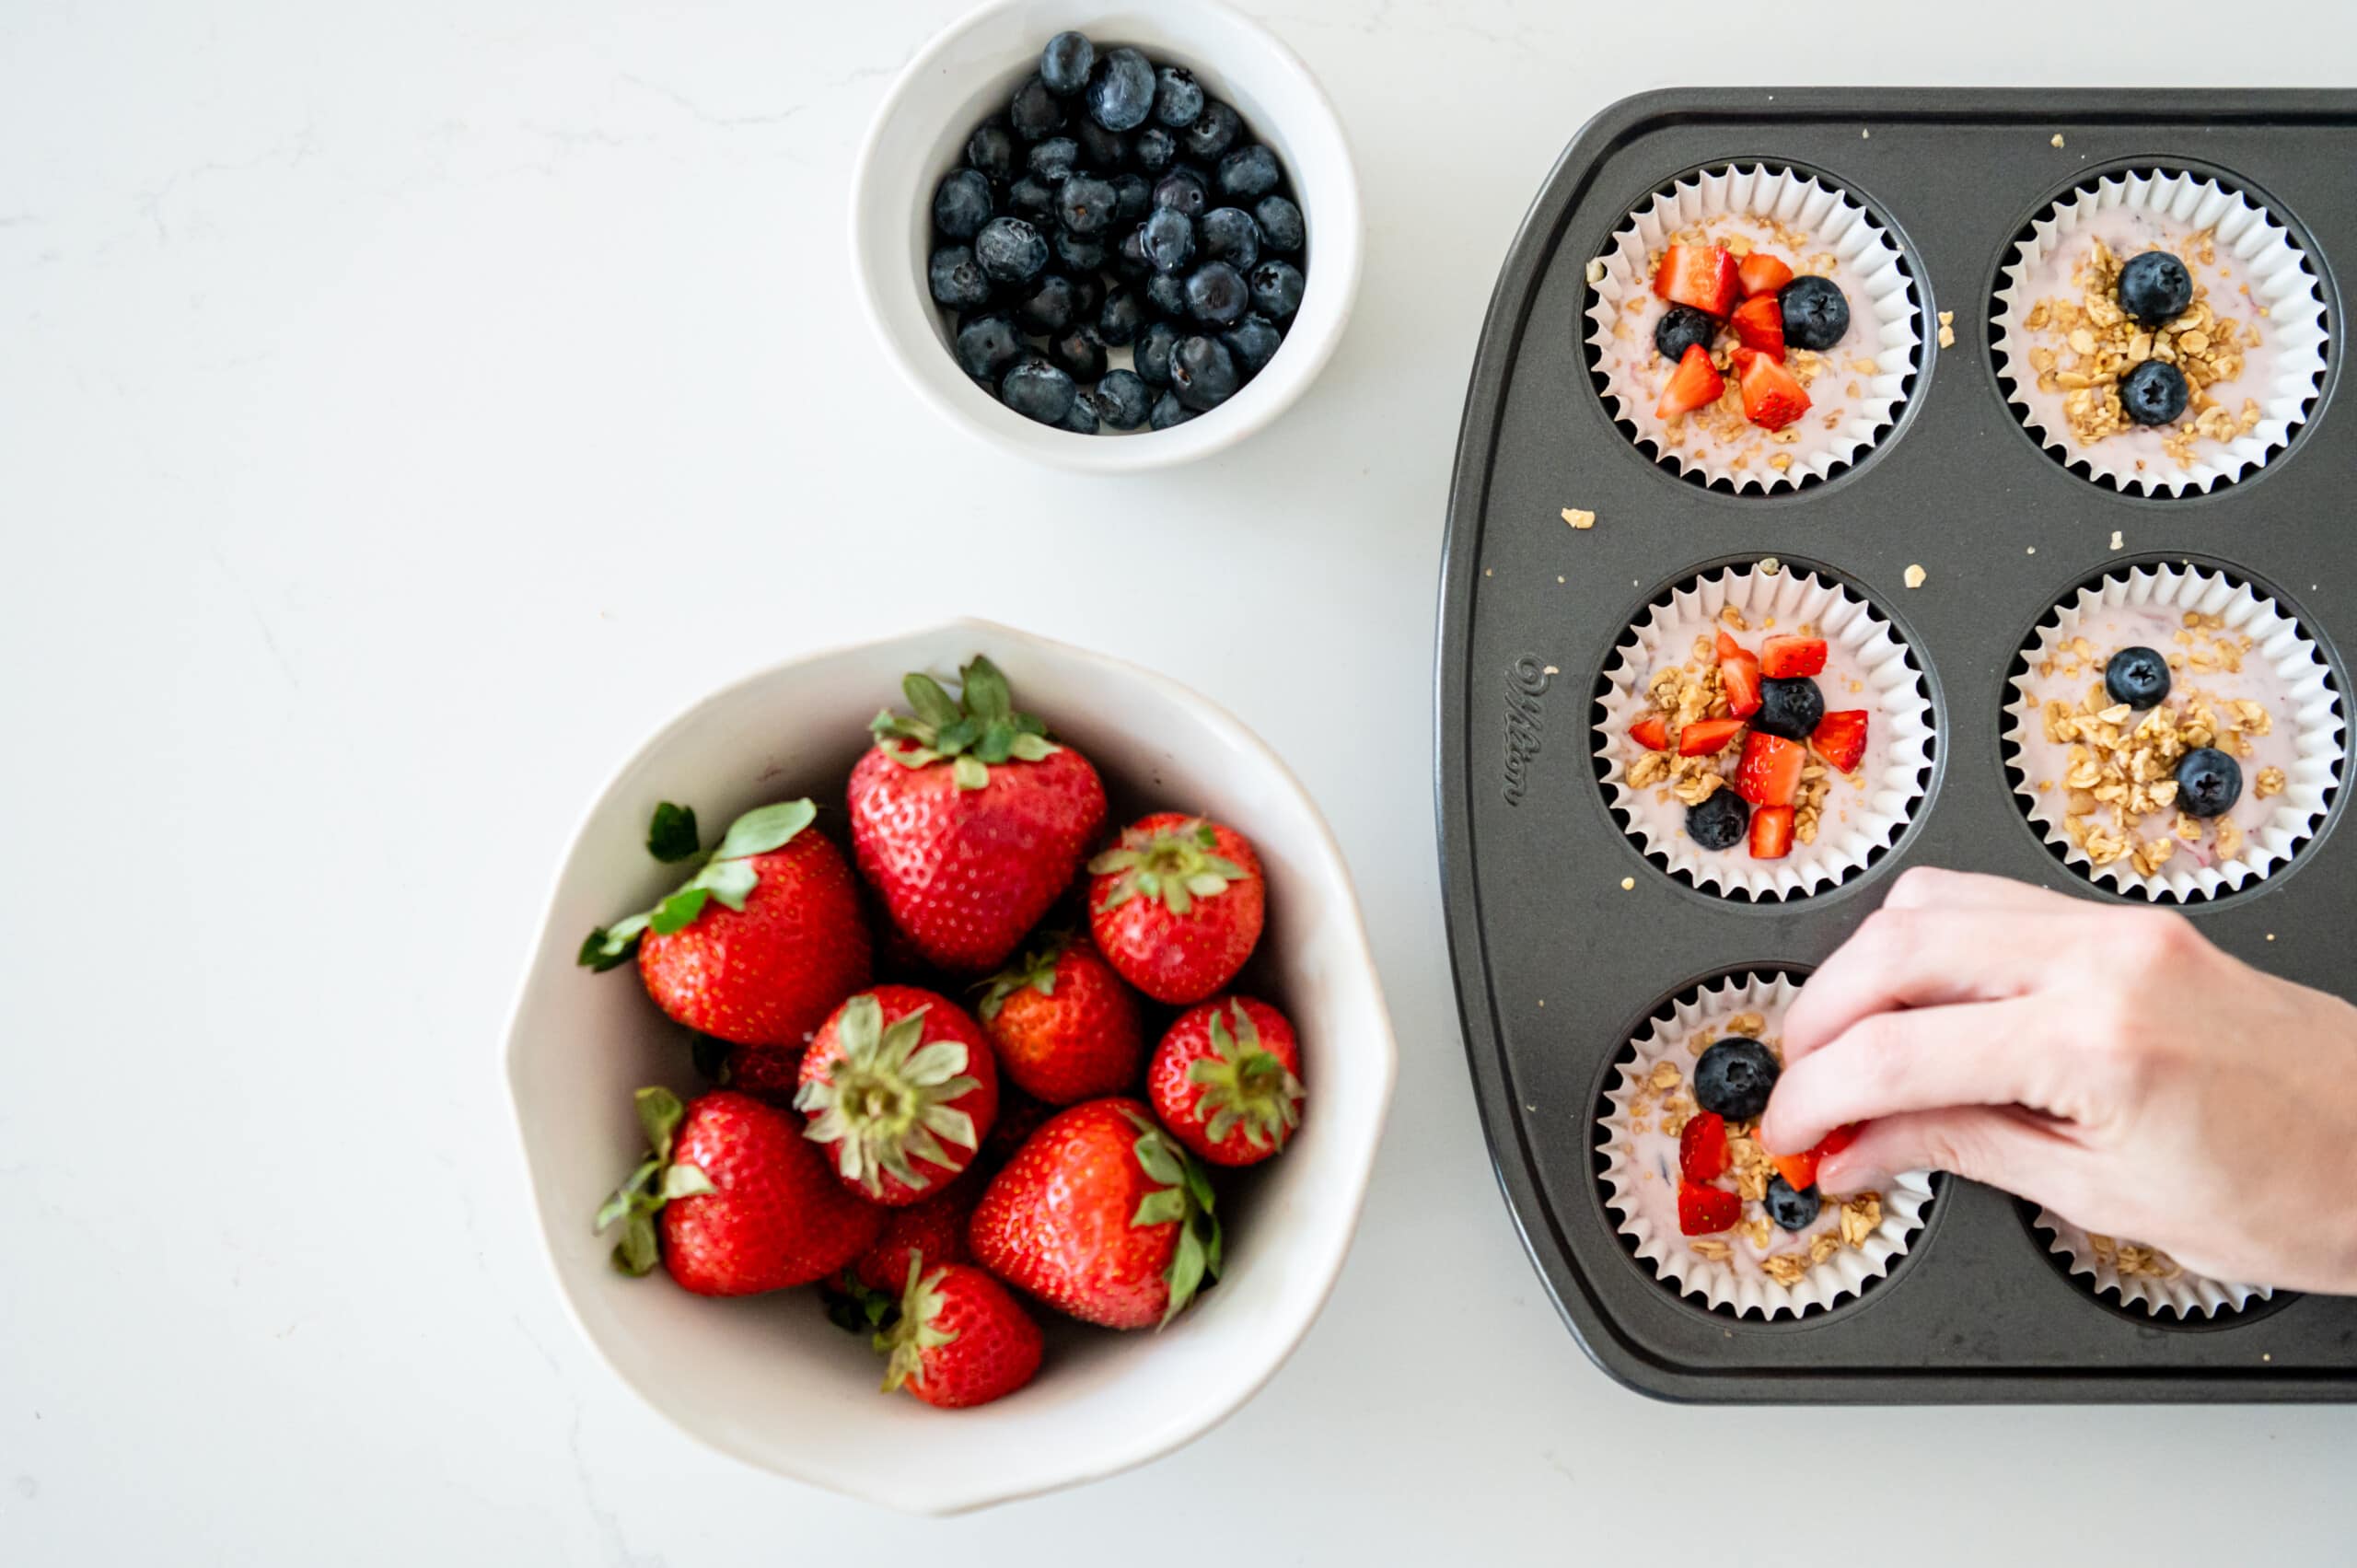 Hand sprinkling berries and granola on top of yogurt in muffin tins.